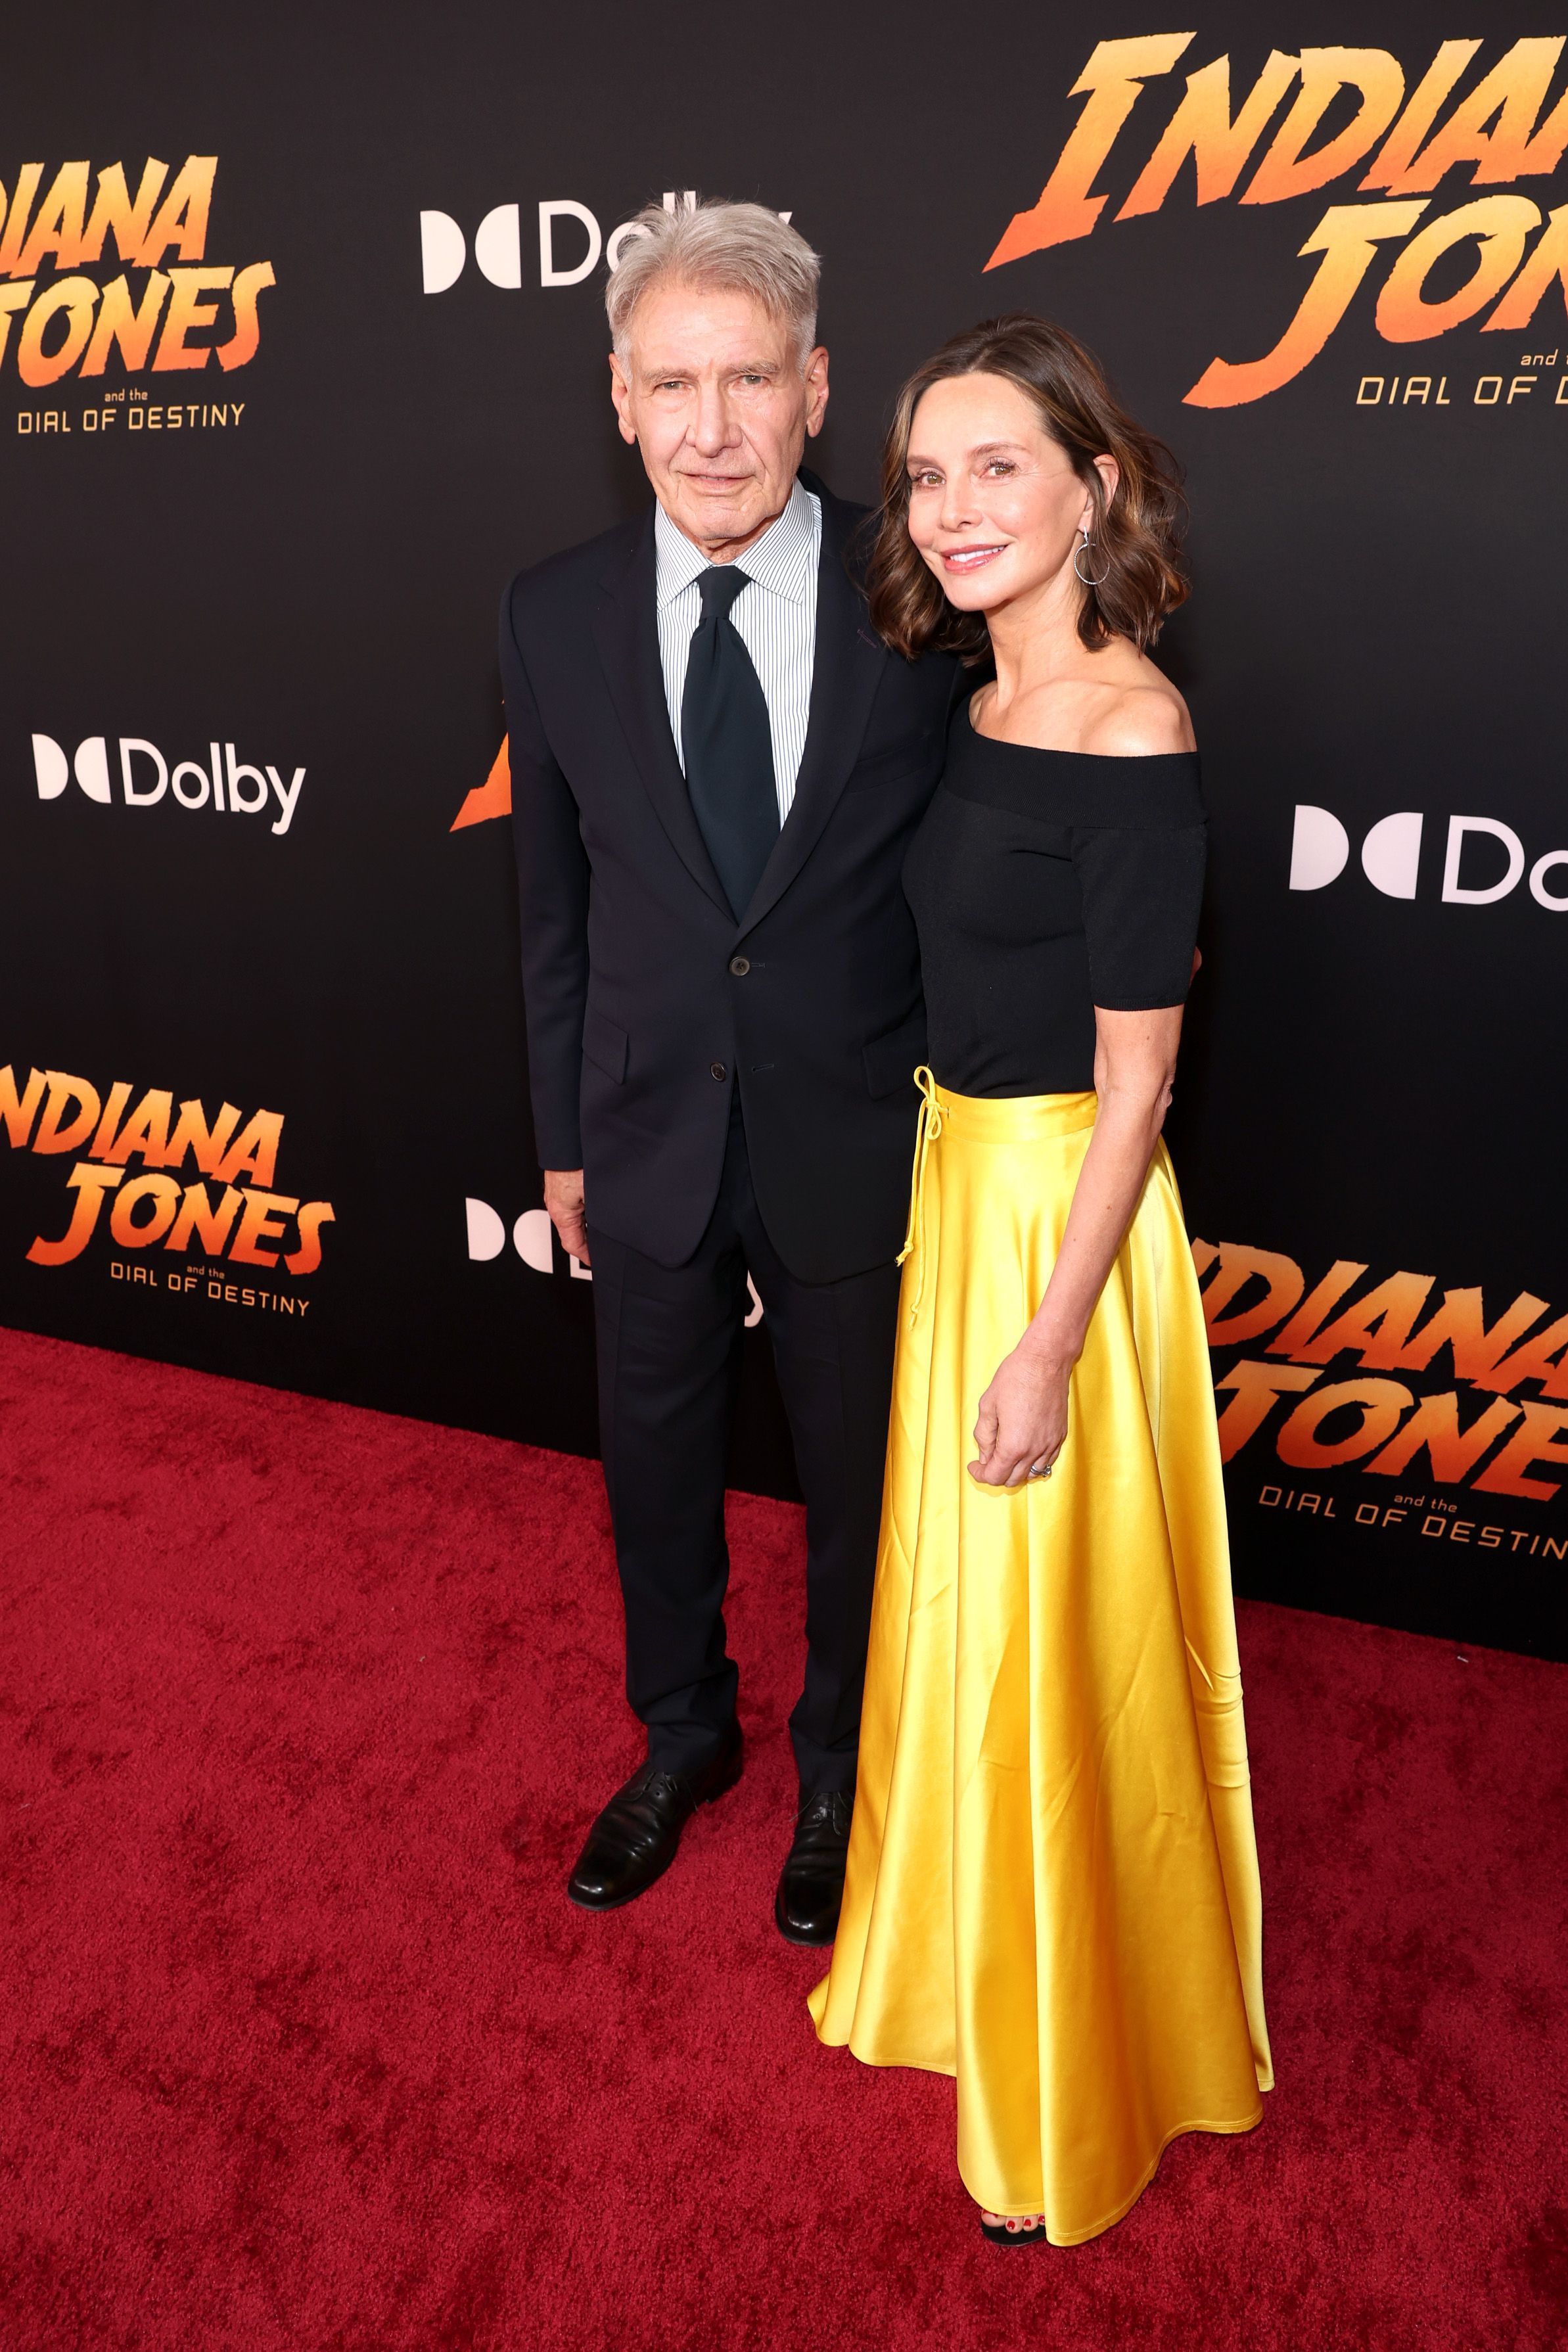 Harrison Ford and Calista Flockhart at the "Indiana Jones and the Dial of Destiny" premiere in Hollywood, California on June 14, 2023 | Source: Getty Images